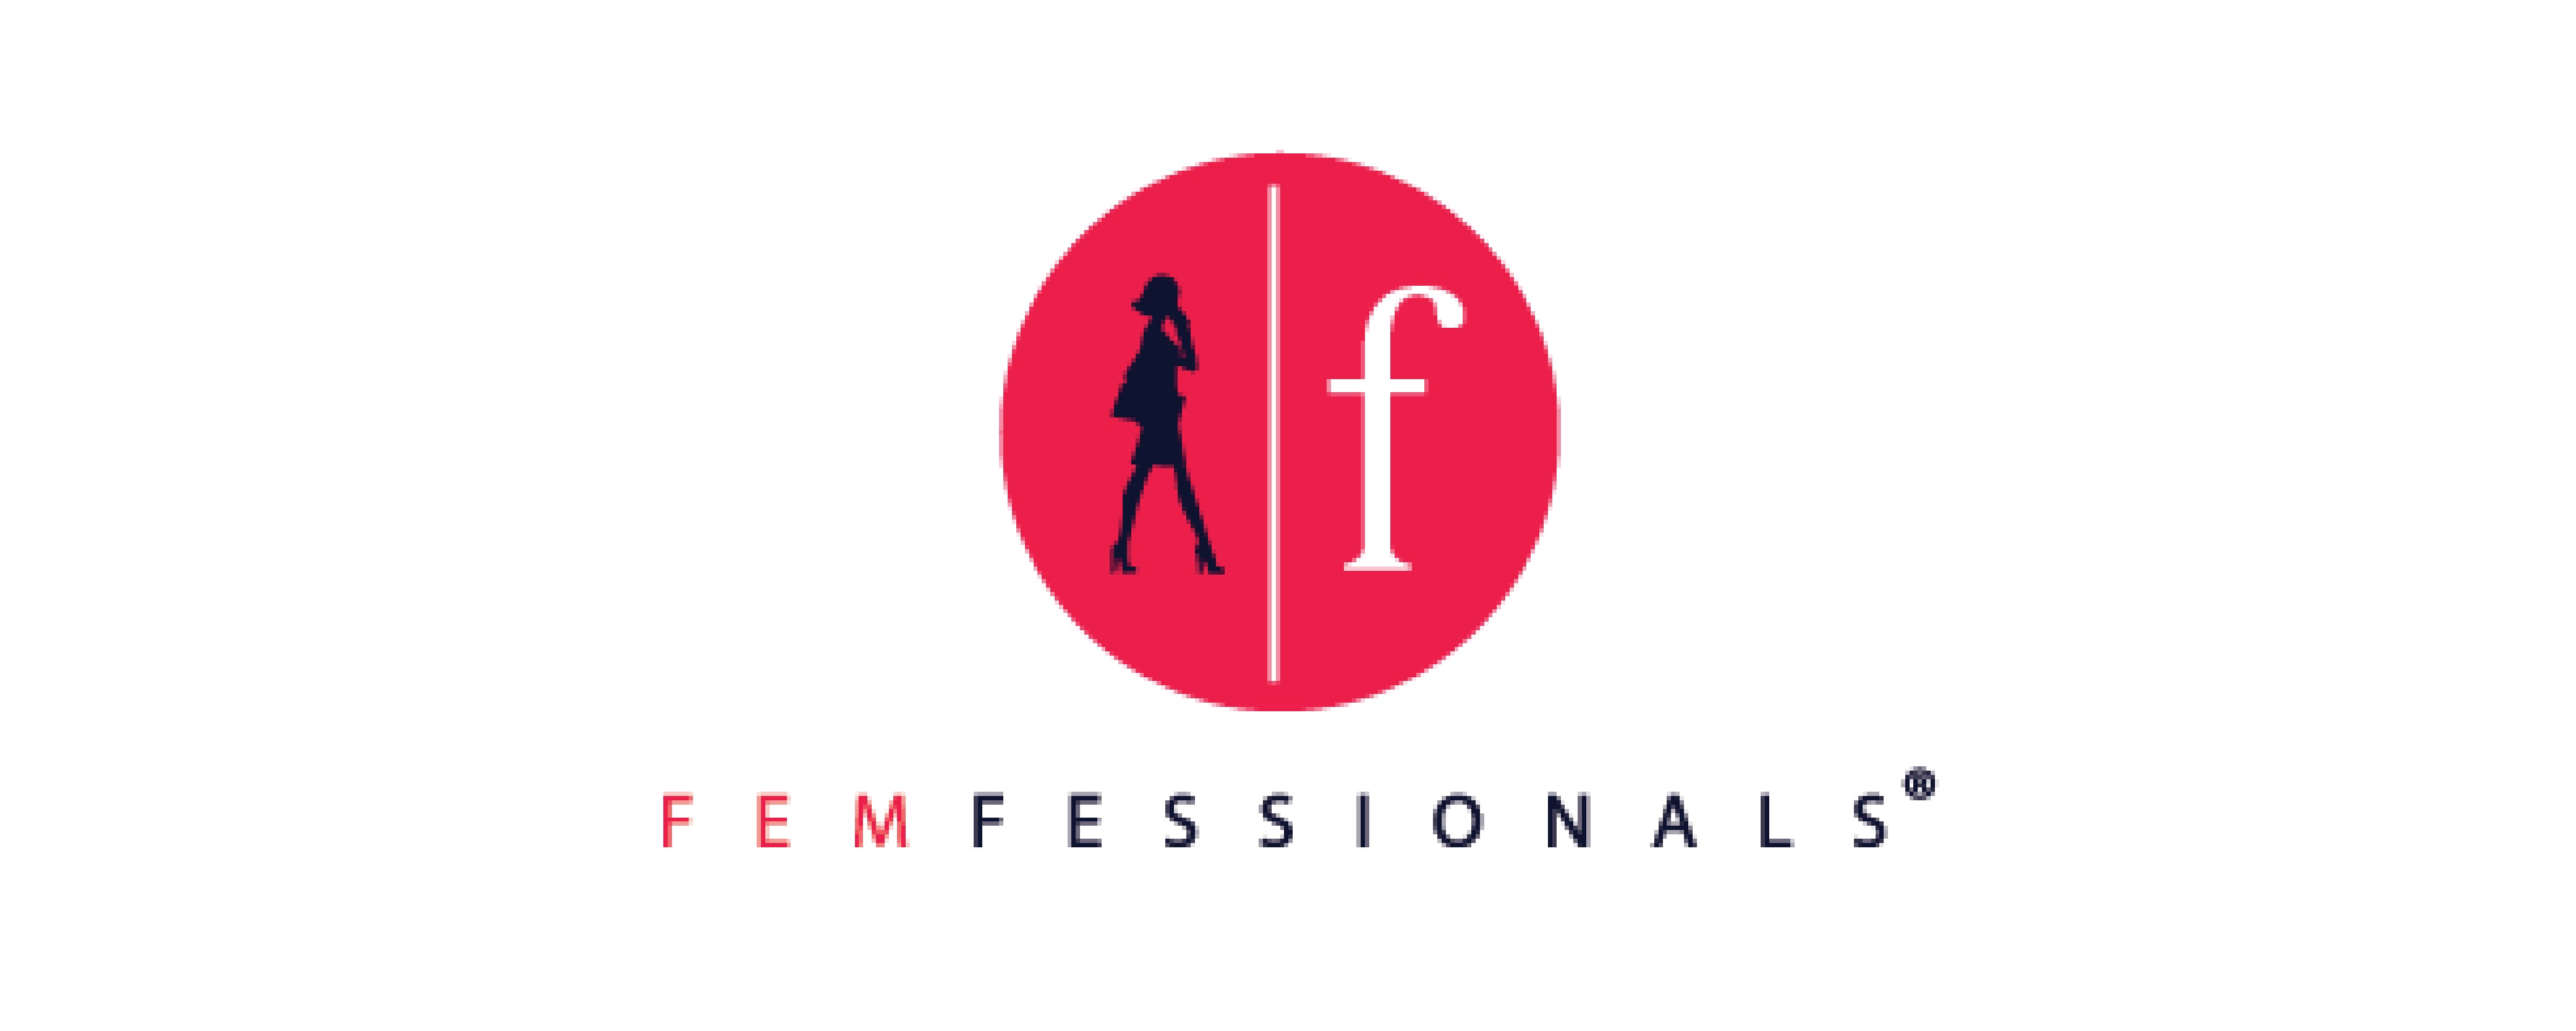 Femfessionals Launch - Sweet Celebration Event